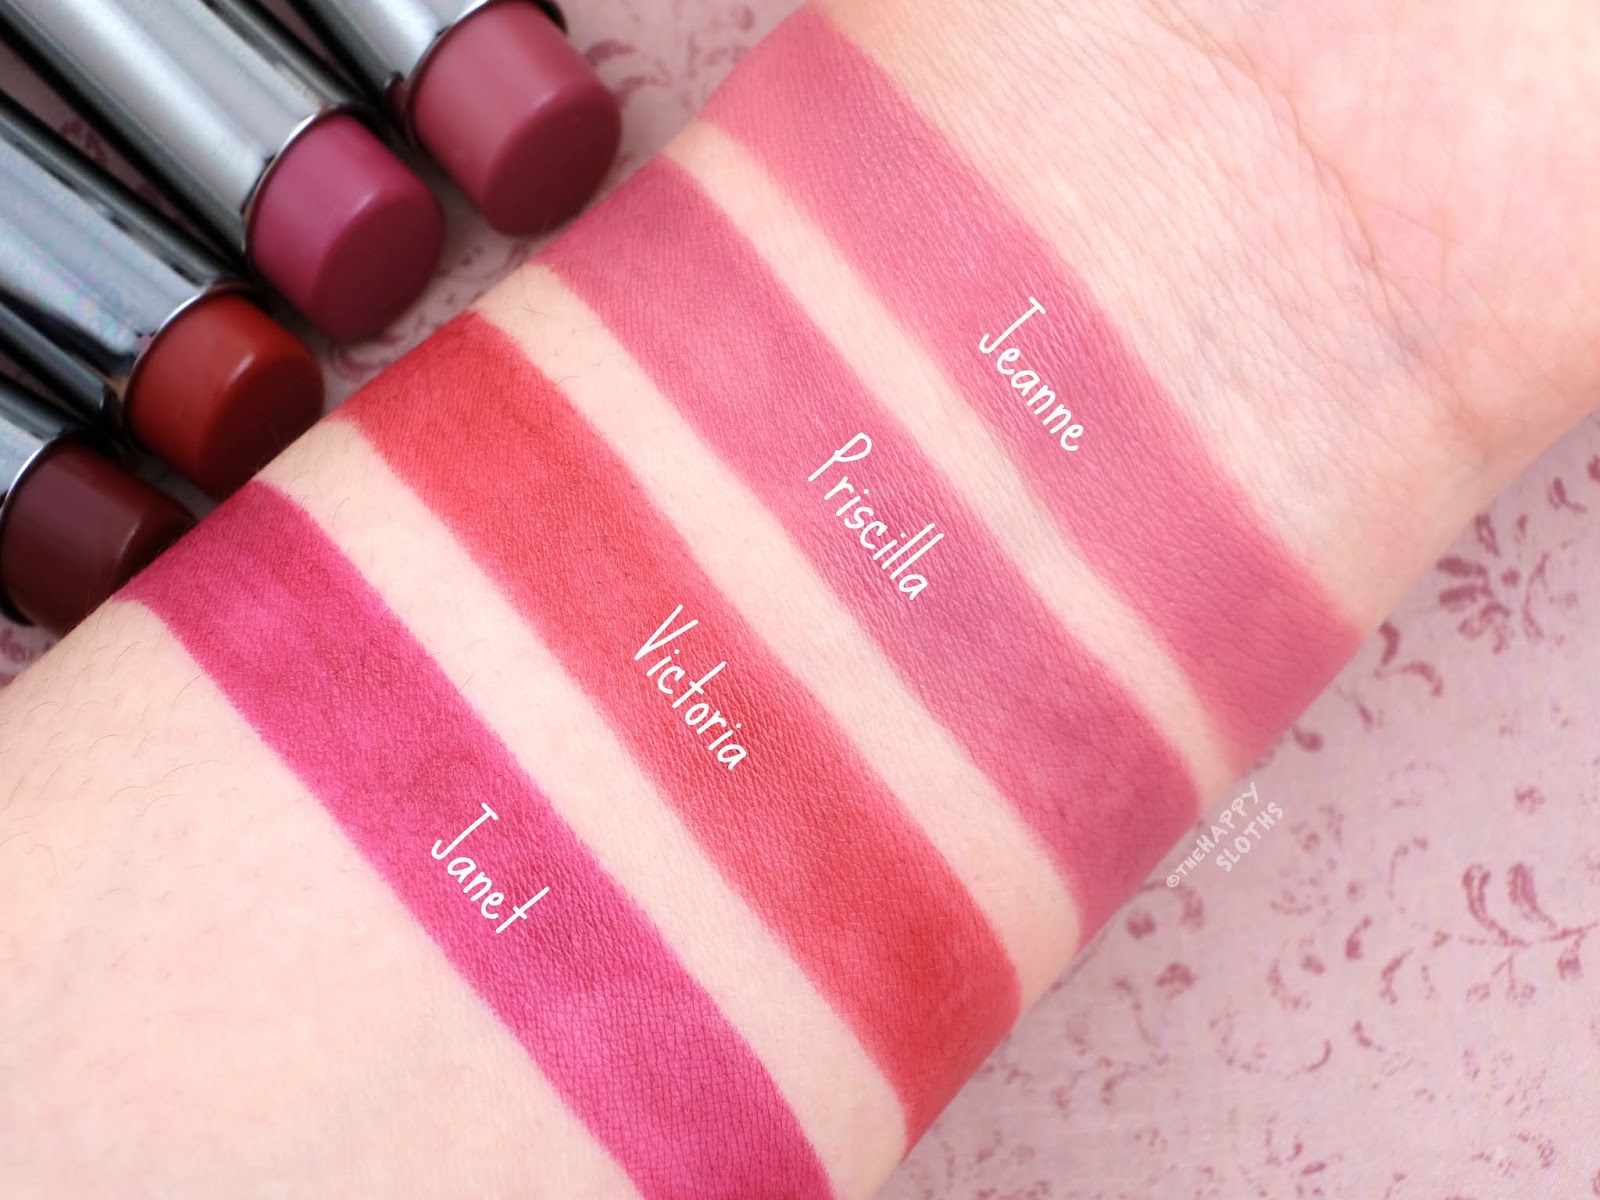 Lise Watier | *NEW SHADES* Rouge Fondant Suprême Lipstick in "Jeanne", "Priscilla", "Victoria" & "Janet": Review and Swatches